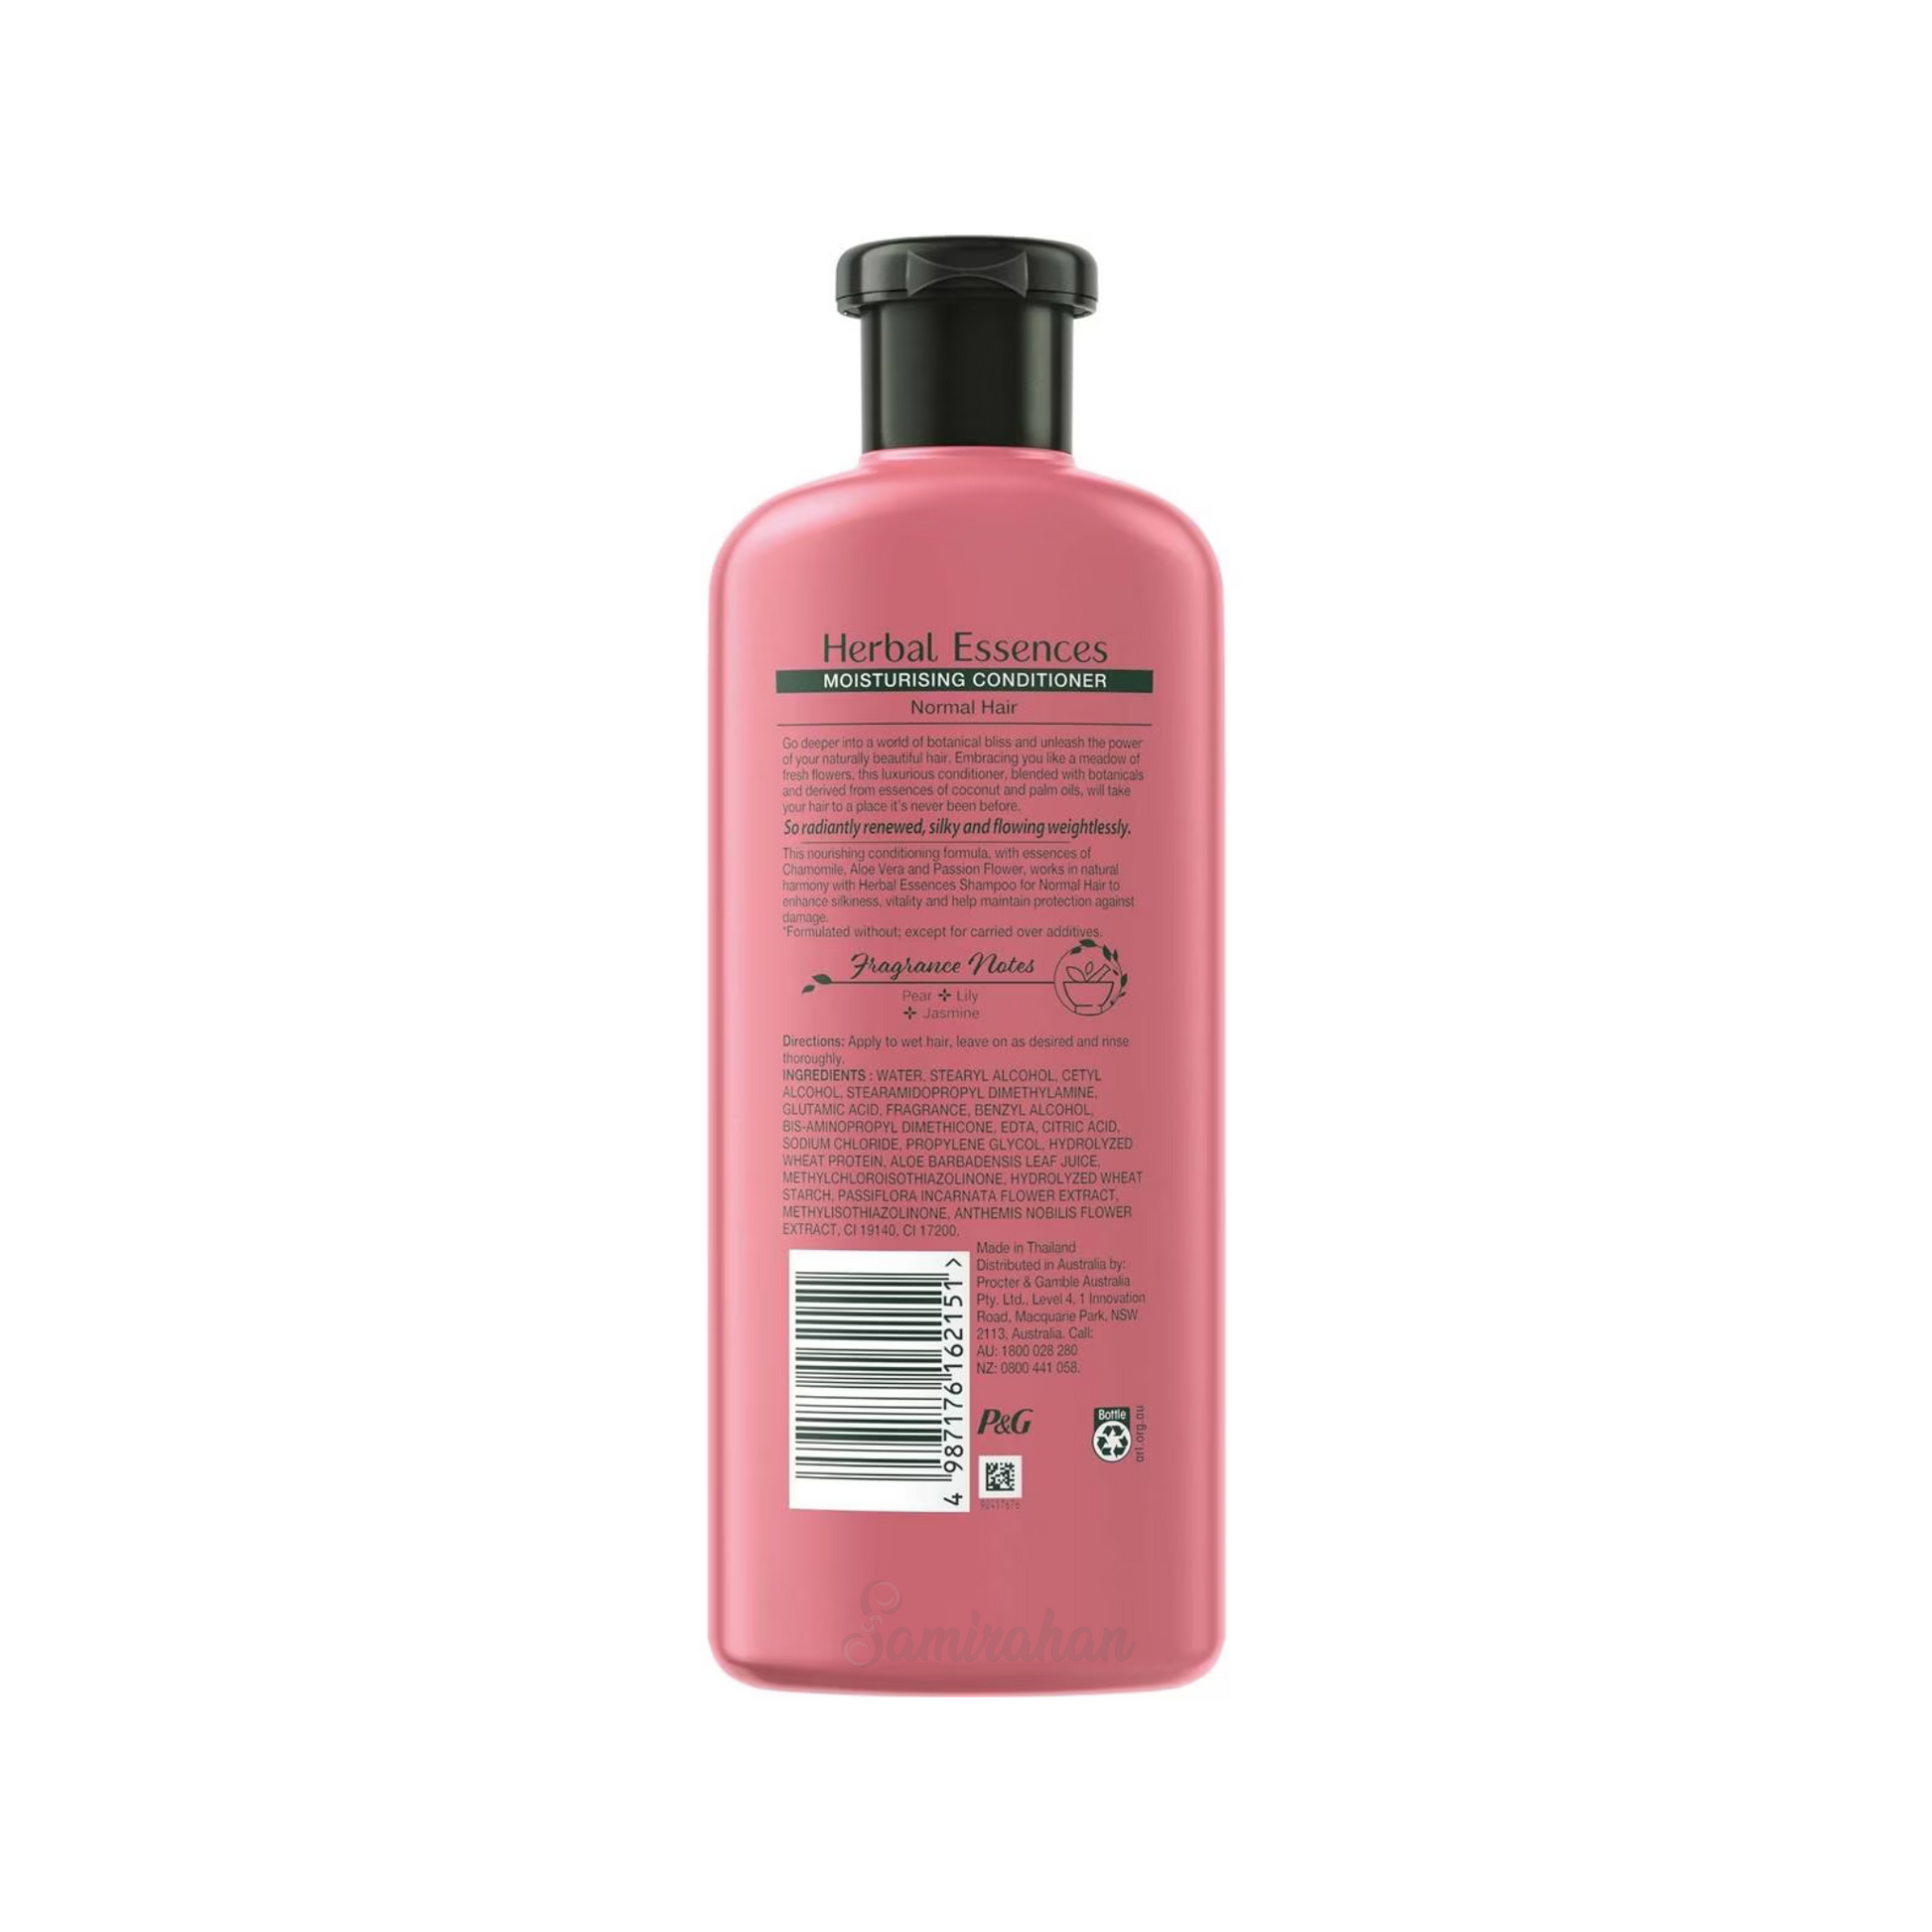 Herbal Essences Classic Rosehip is a conditioner with scents inspired by nature. Replenishes moisture to colour-treated, dry or damaged hair. Best foreign genuine authentic Australian Aussie imported real original premium haircare safe care fall healthy cheap price in Dhaka Chittagong Bangladesh.